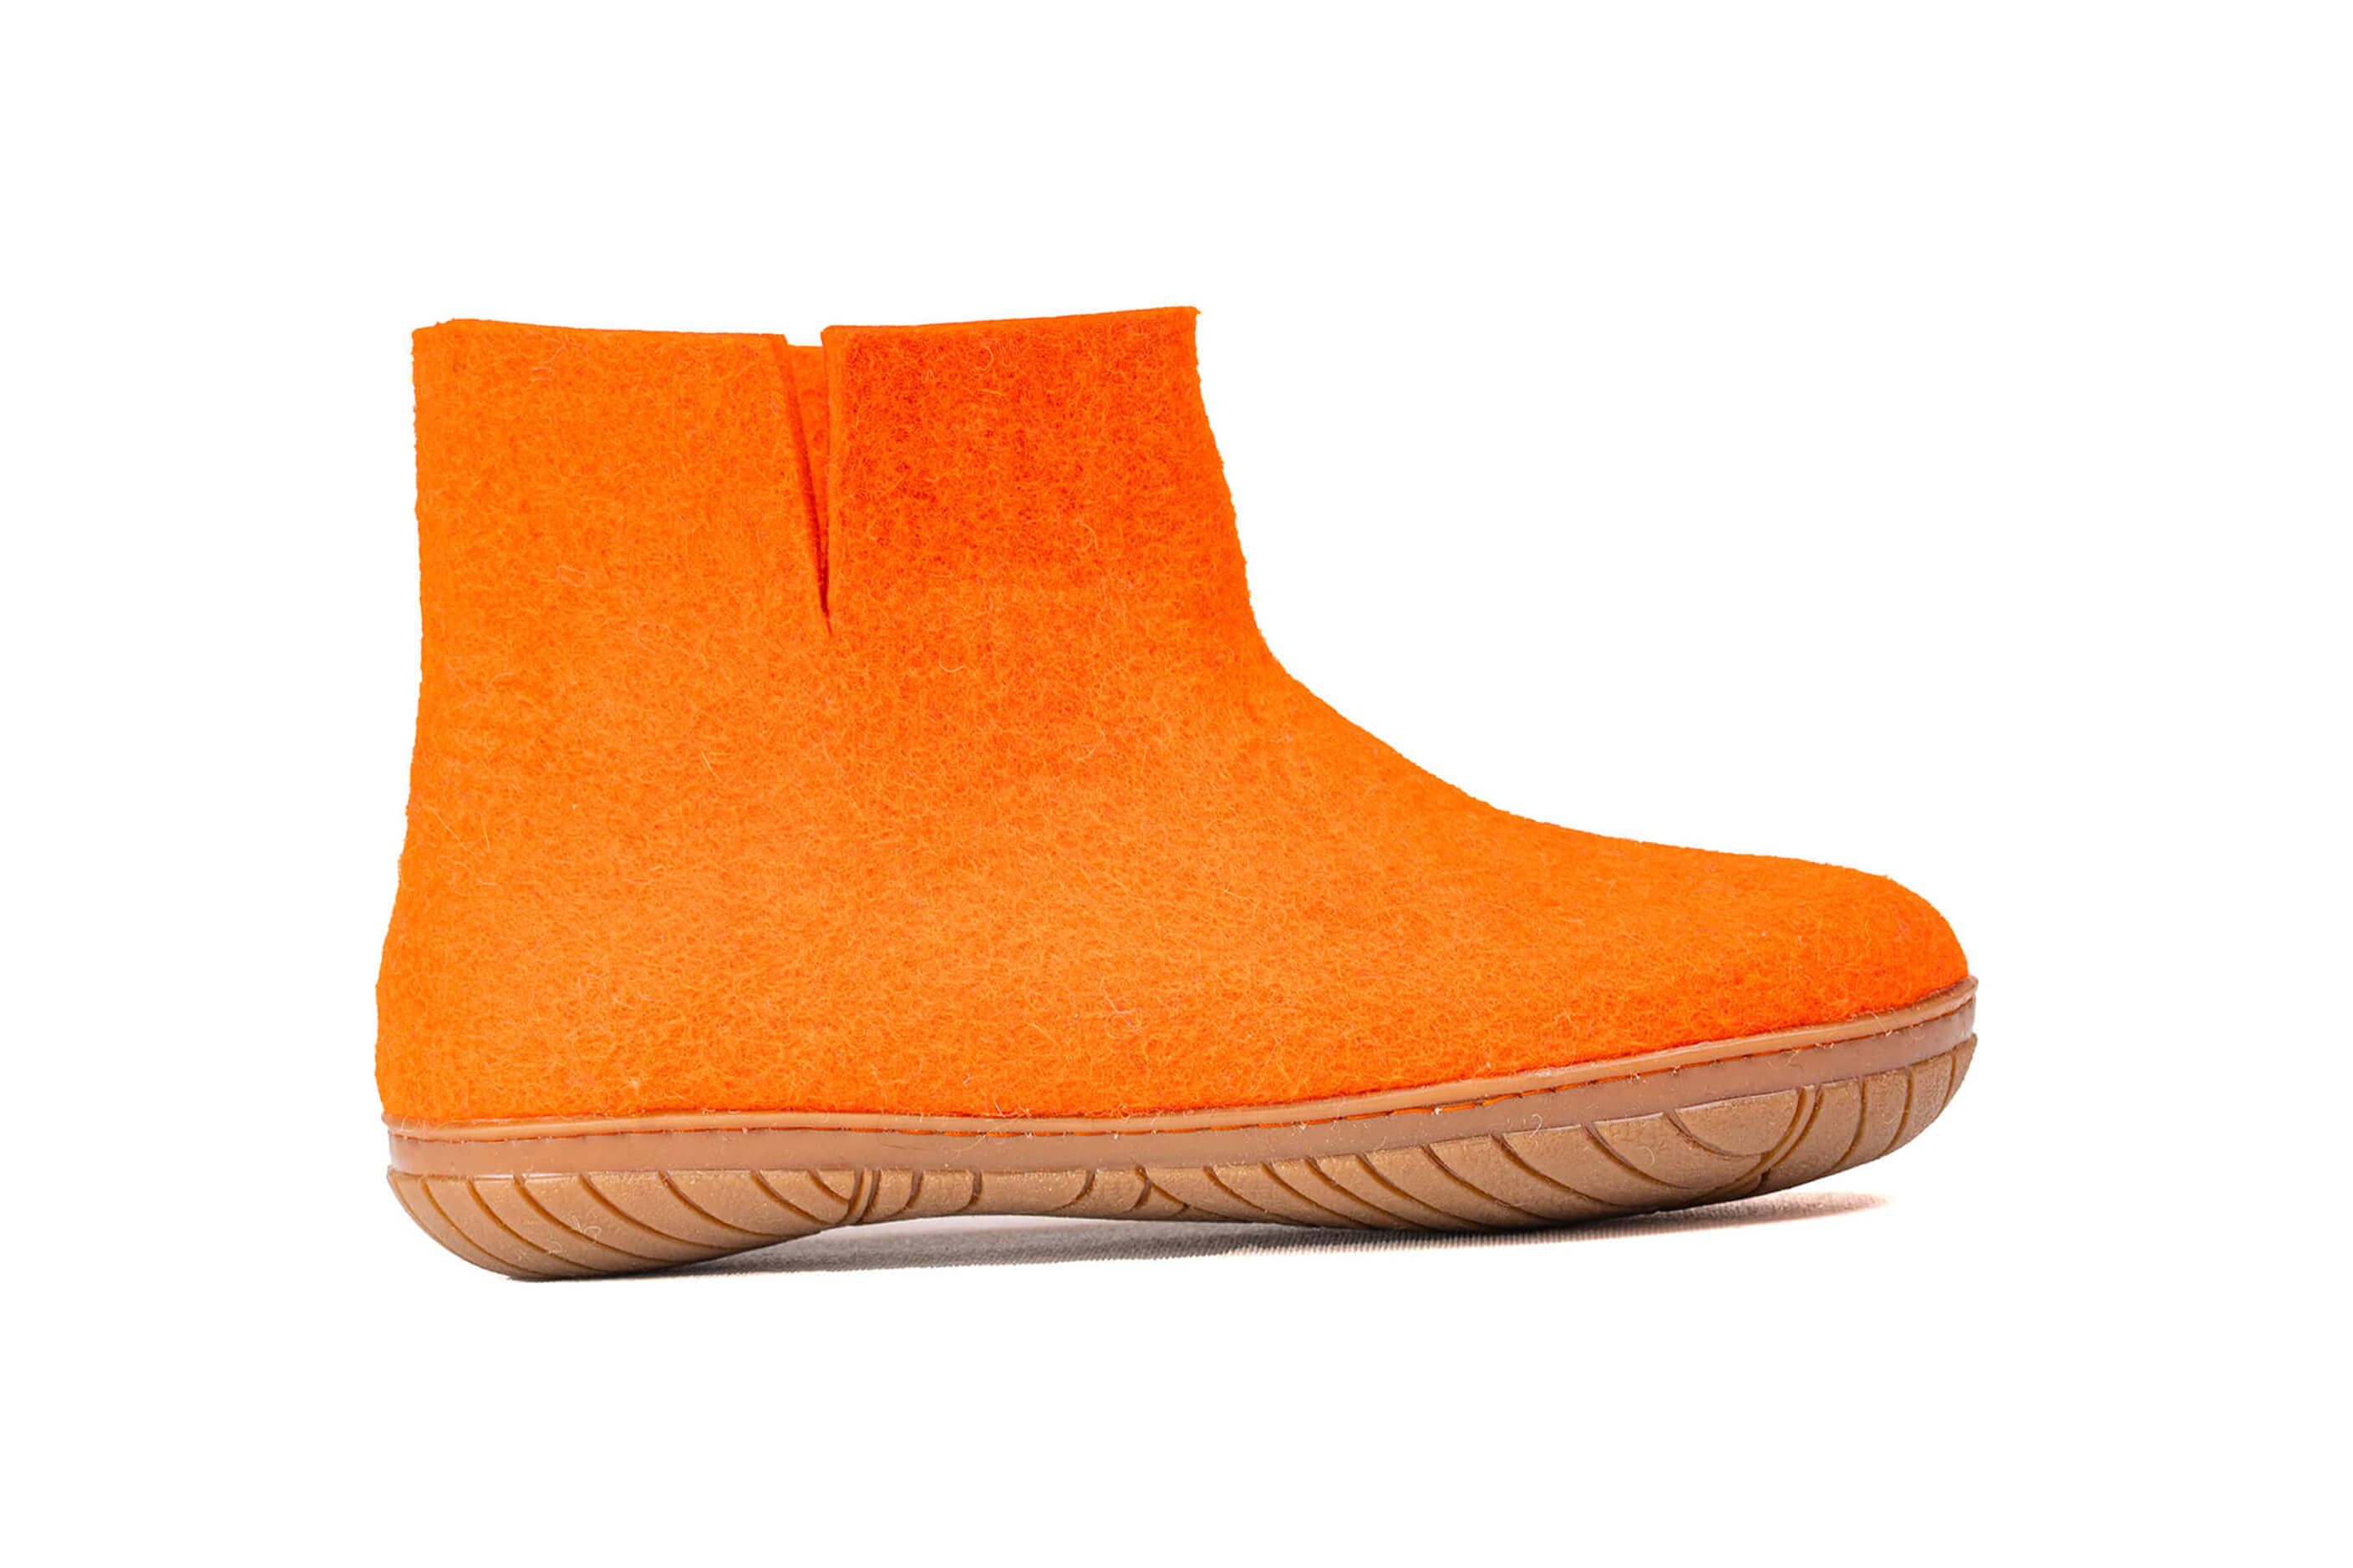 Outdoor Low Boots With Rubber Sole - Orange